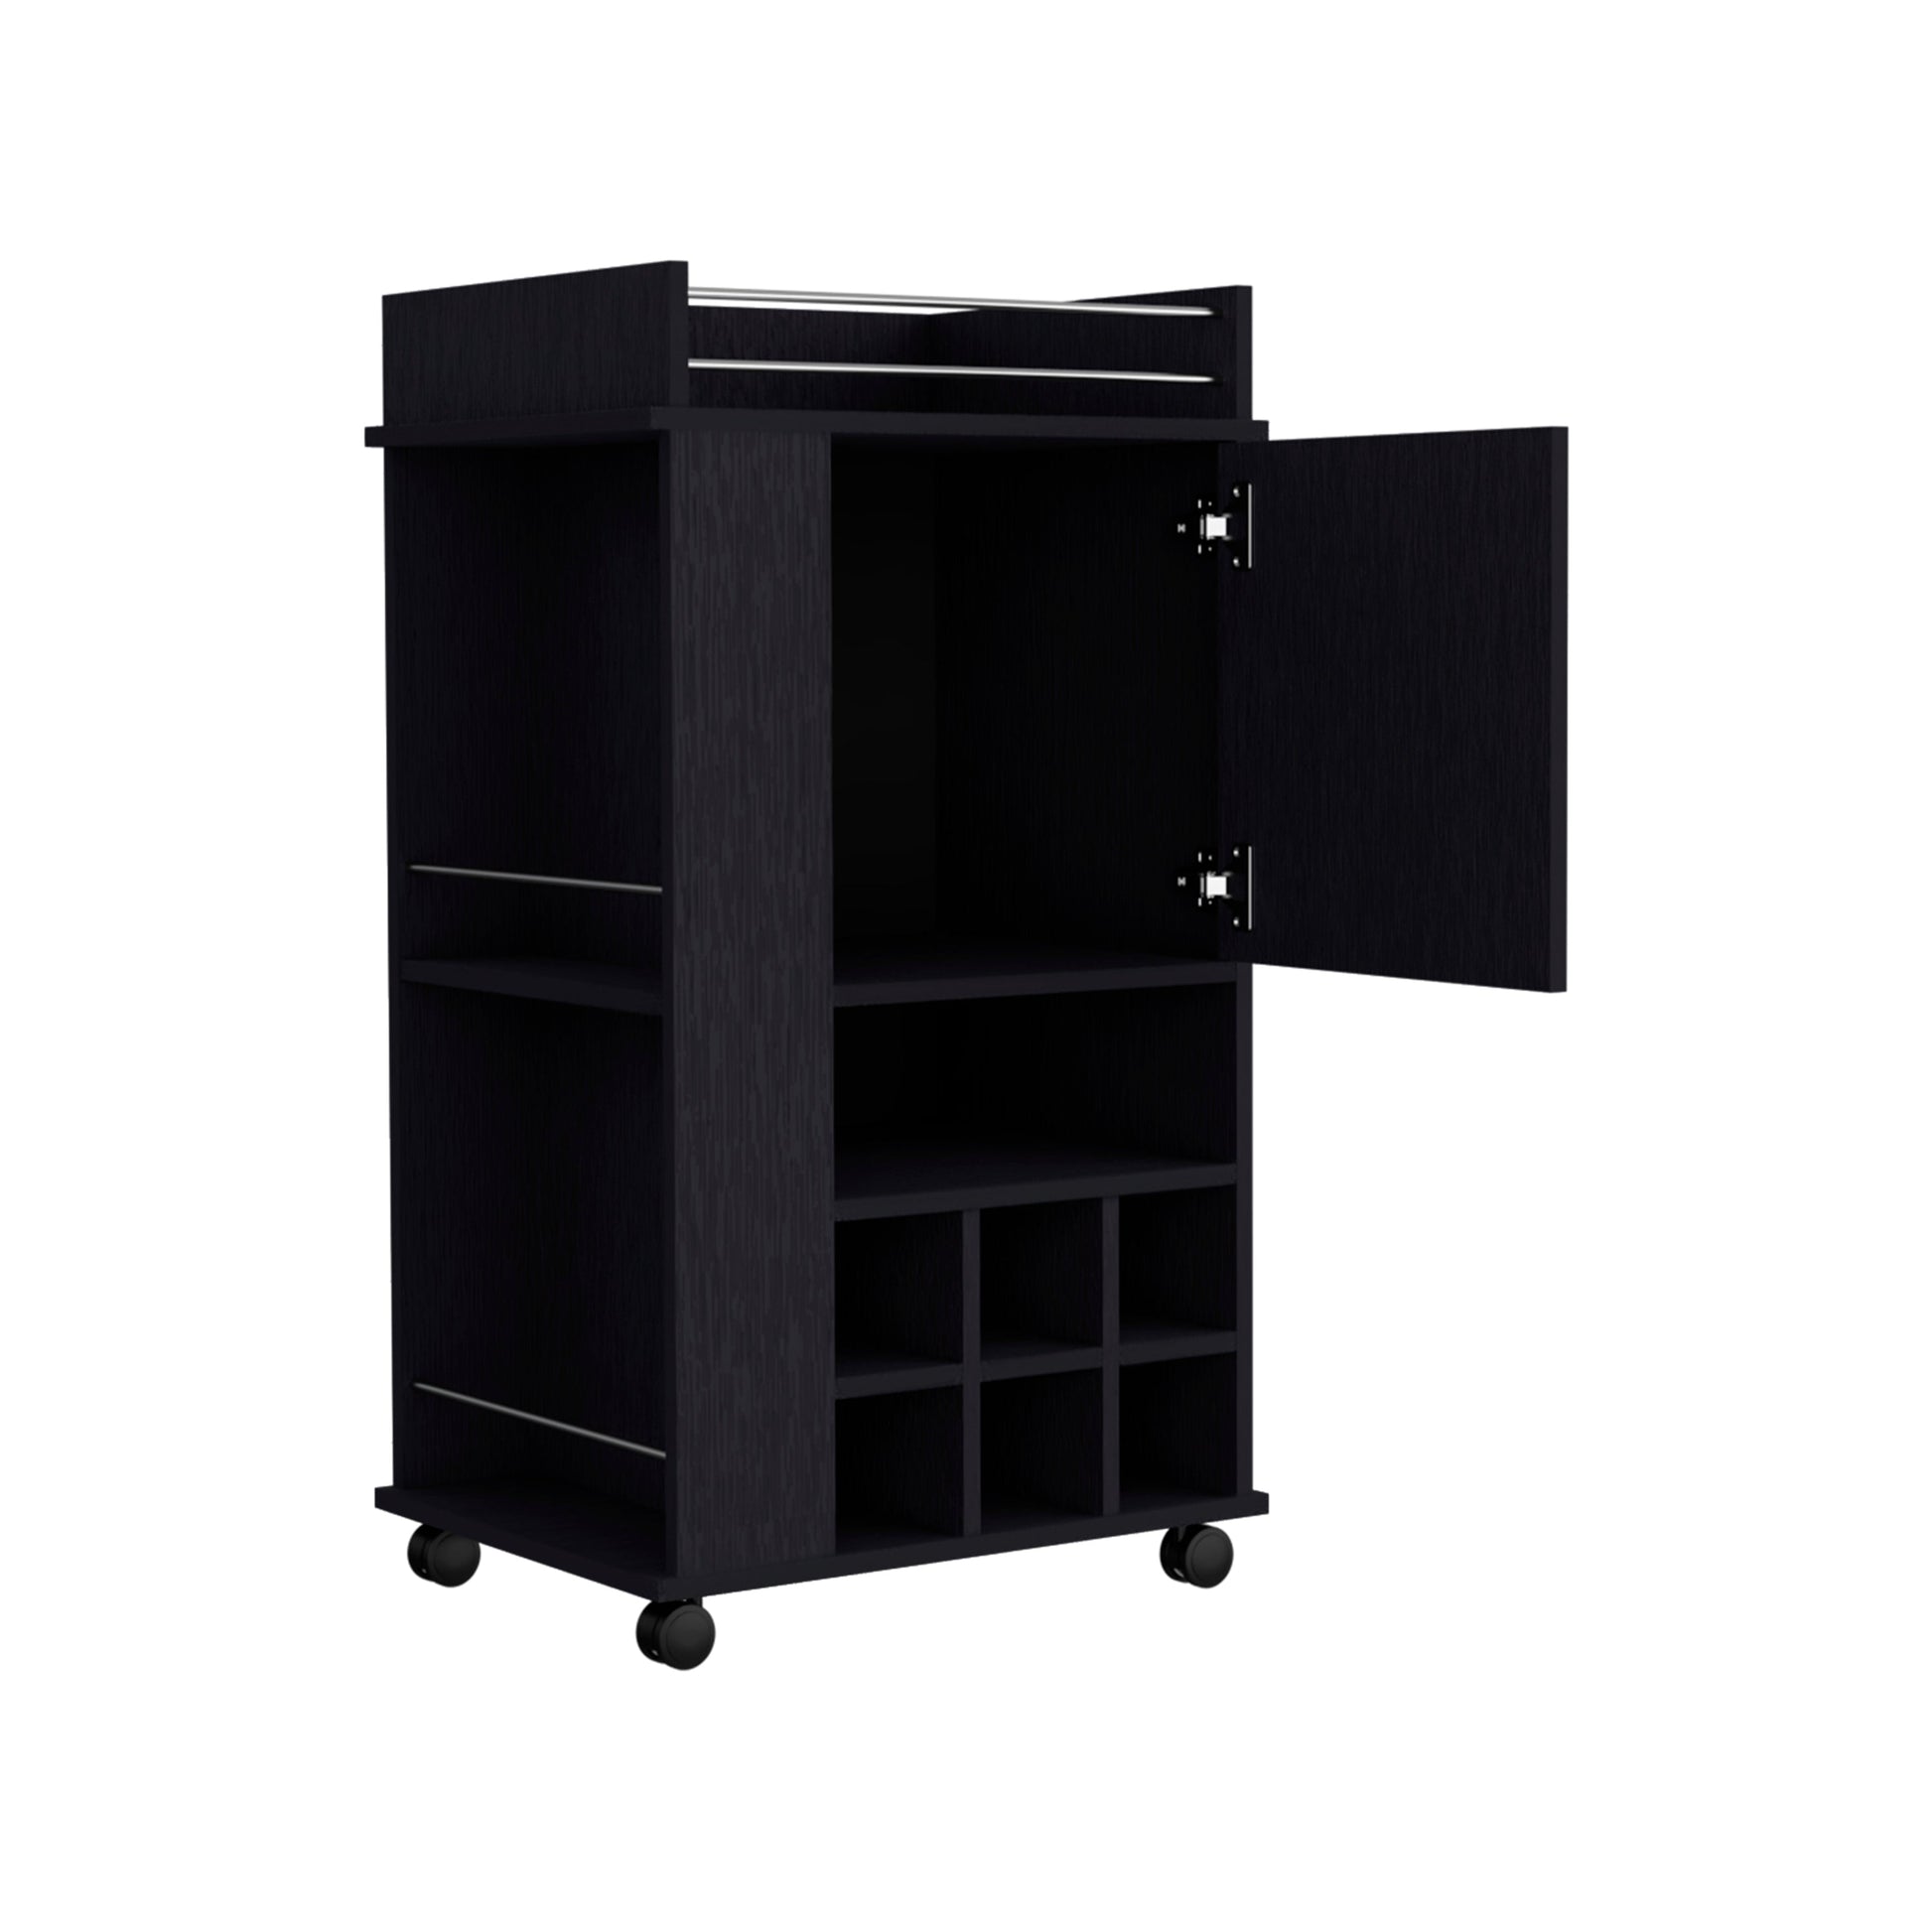 Bar Cart with Casters Reese, Six Wine Cubbies and Single Door, Black Wengue Finish-5